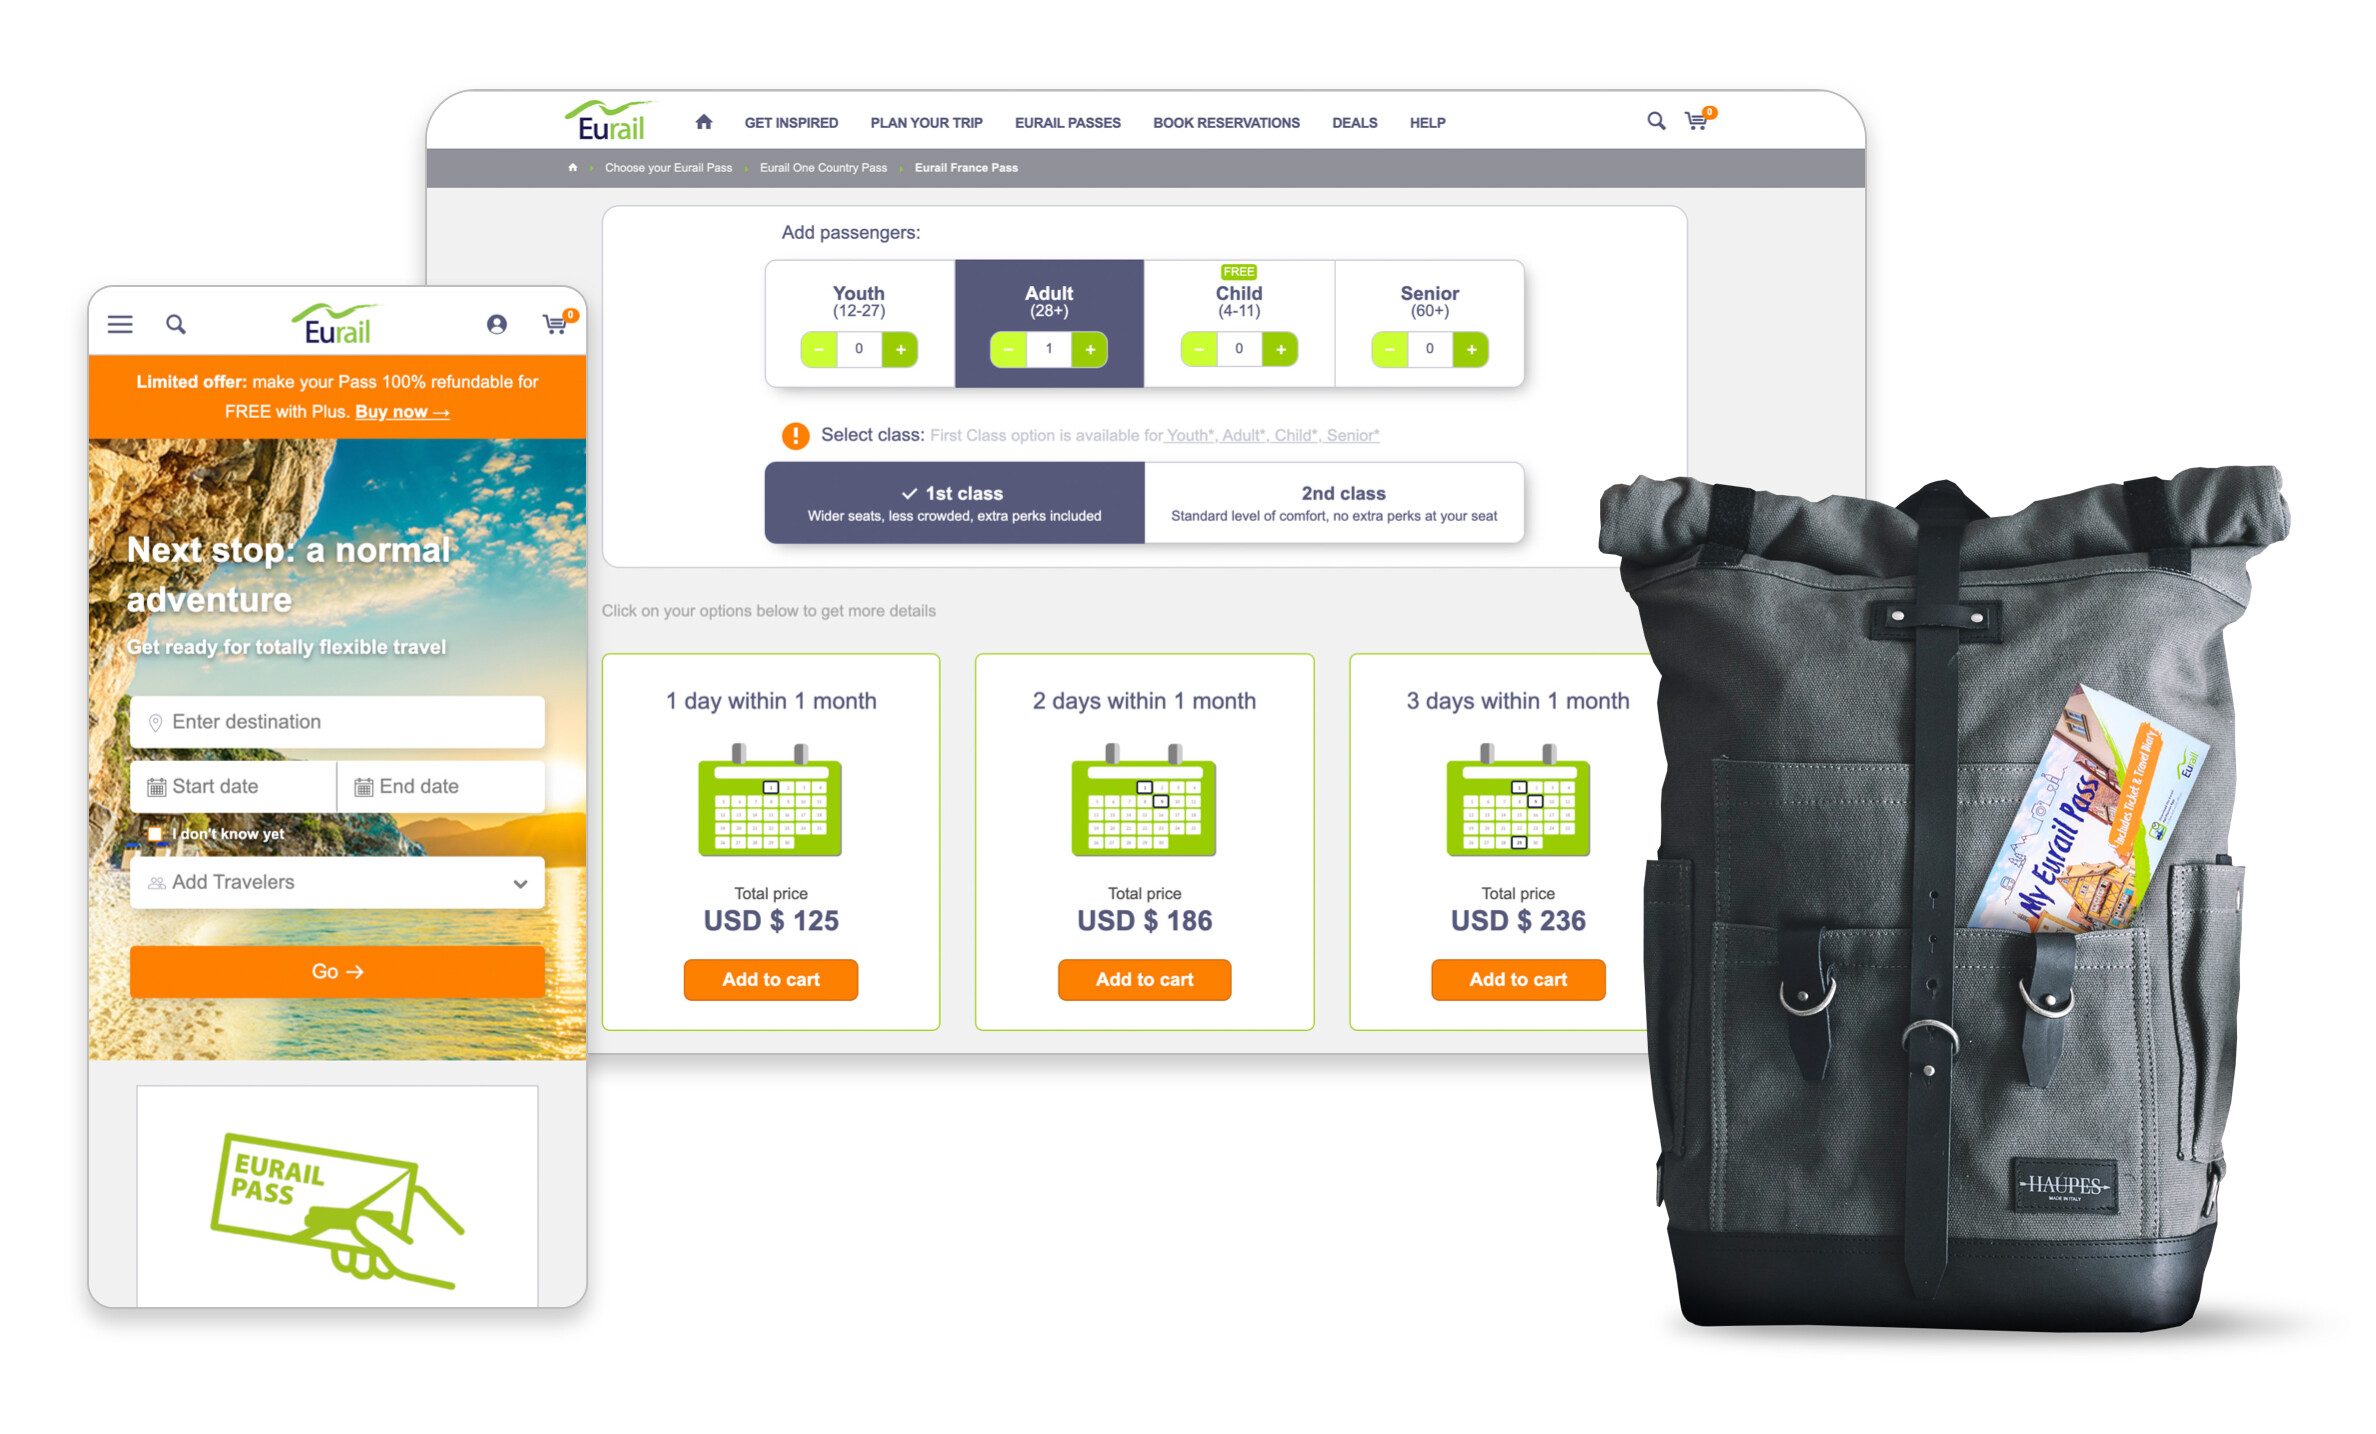 Eurail's new digital commerce allows them to quickly and effectively respond to market trends